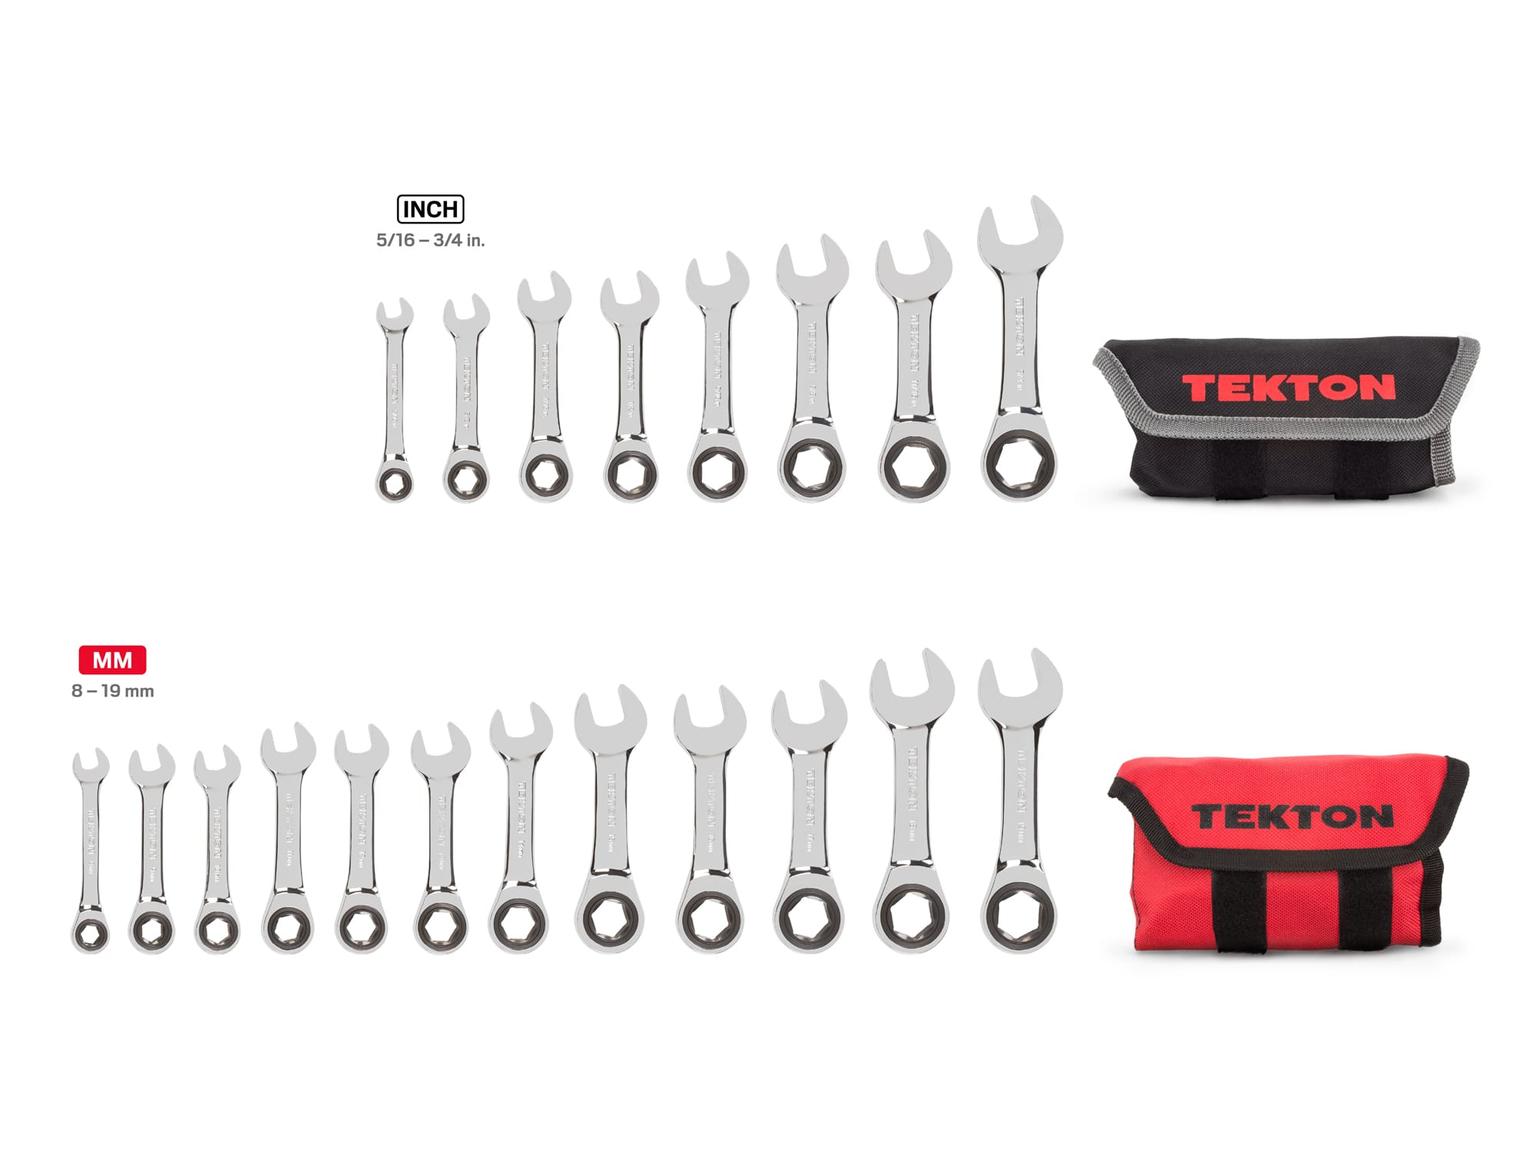 TEKTON WRN50361-T Stubby Ratcheting Combination Wrench Set with Pouch, 20-Piece (5/16-3/4 in., 8-19 mm)